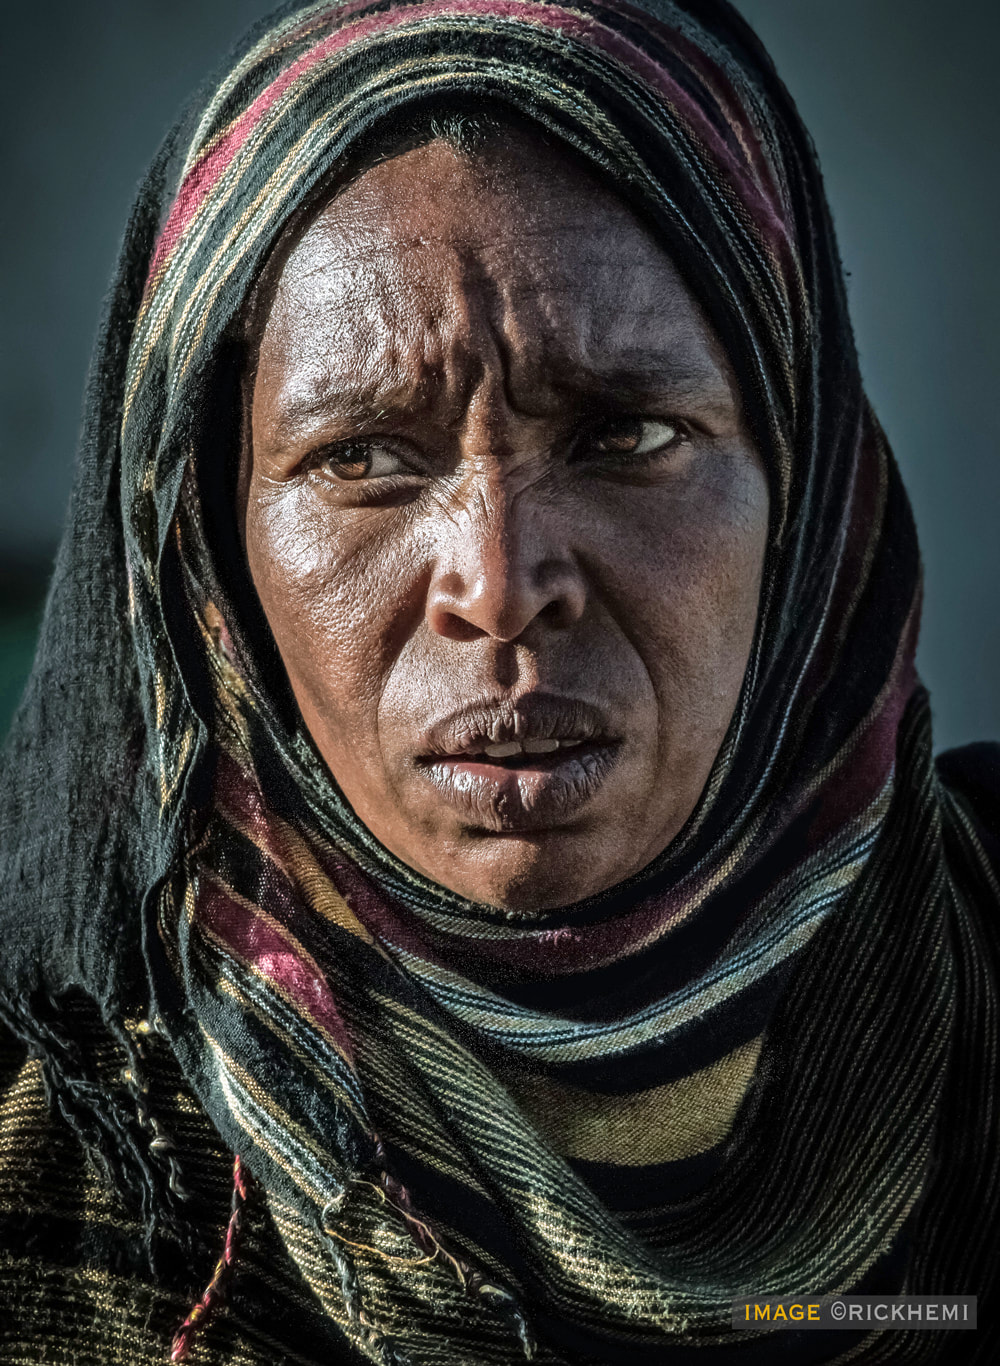 overland travel and transit Africa, street snap portrait by Rick Hemi